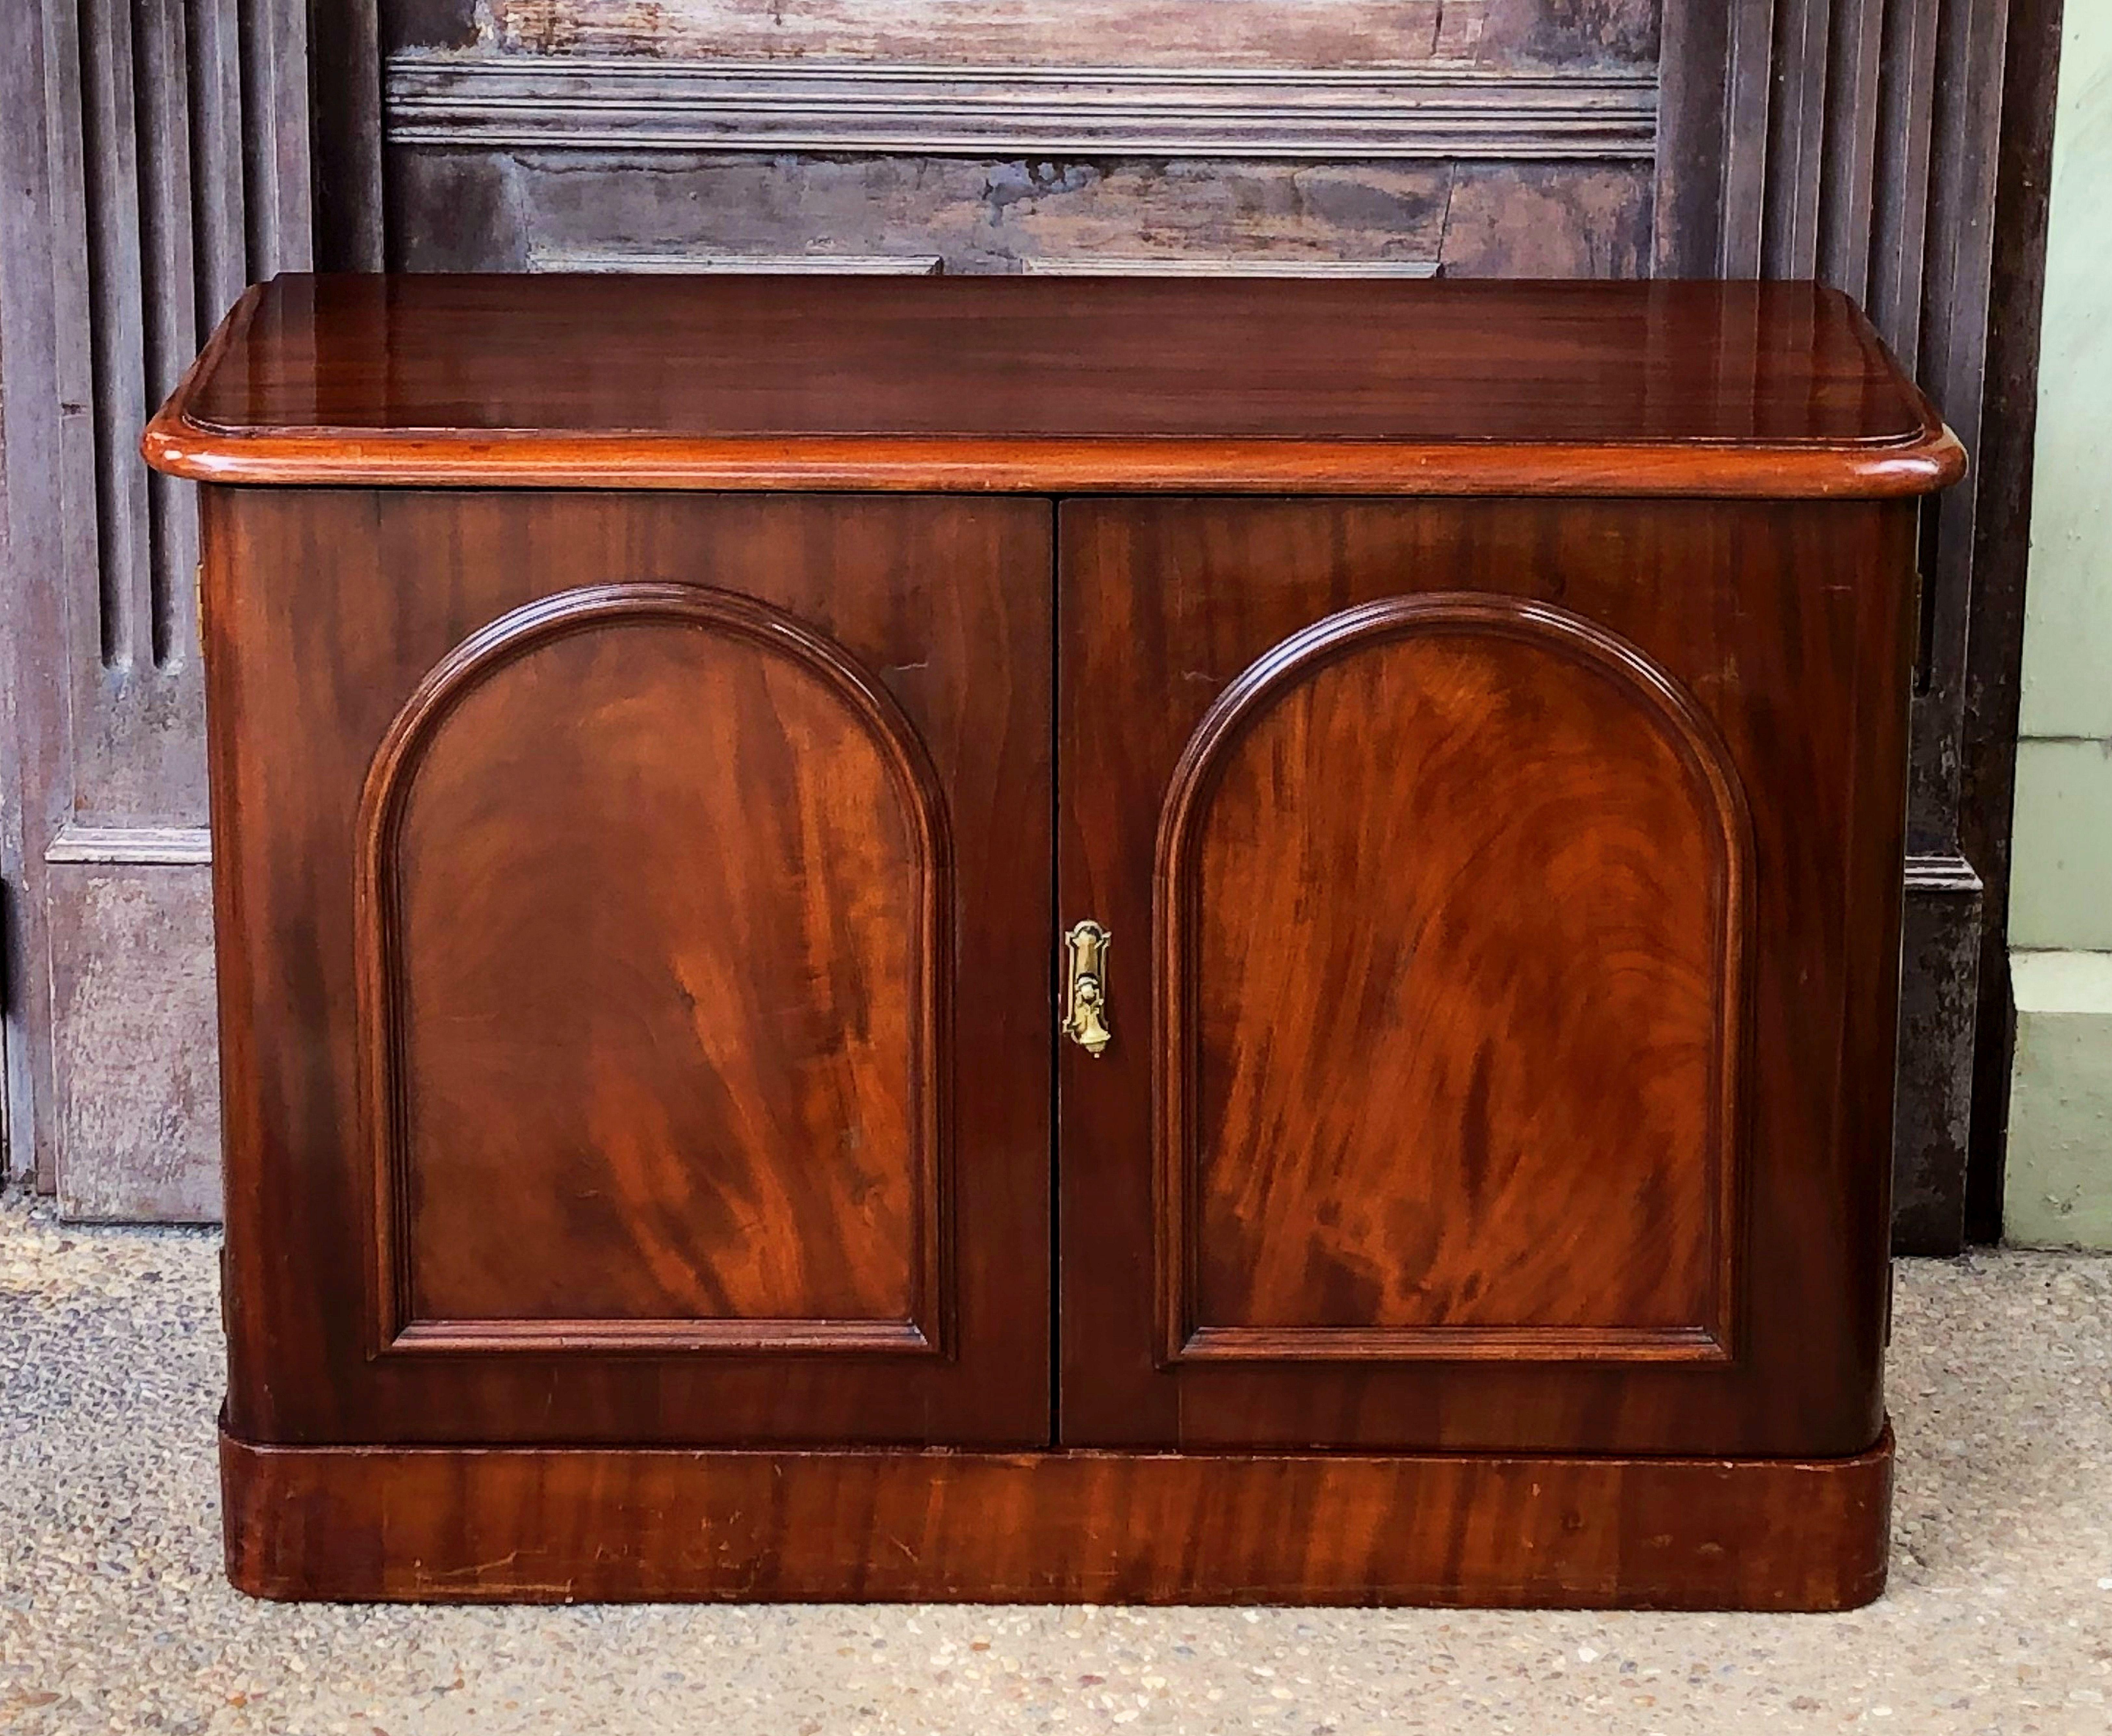 A fine English chiffonier or two-door cabinet server of flame-cut mahogany, featuring a moulded-edge top, over two arch-paneled cupboard doors enclosing a shelf, with brass hardware, resting on a raised plinth base.